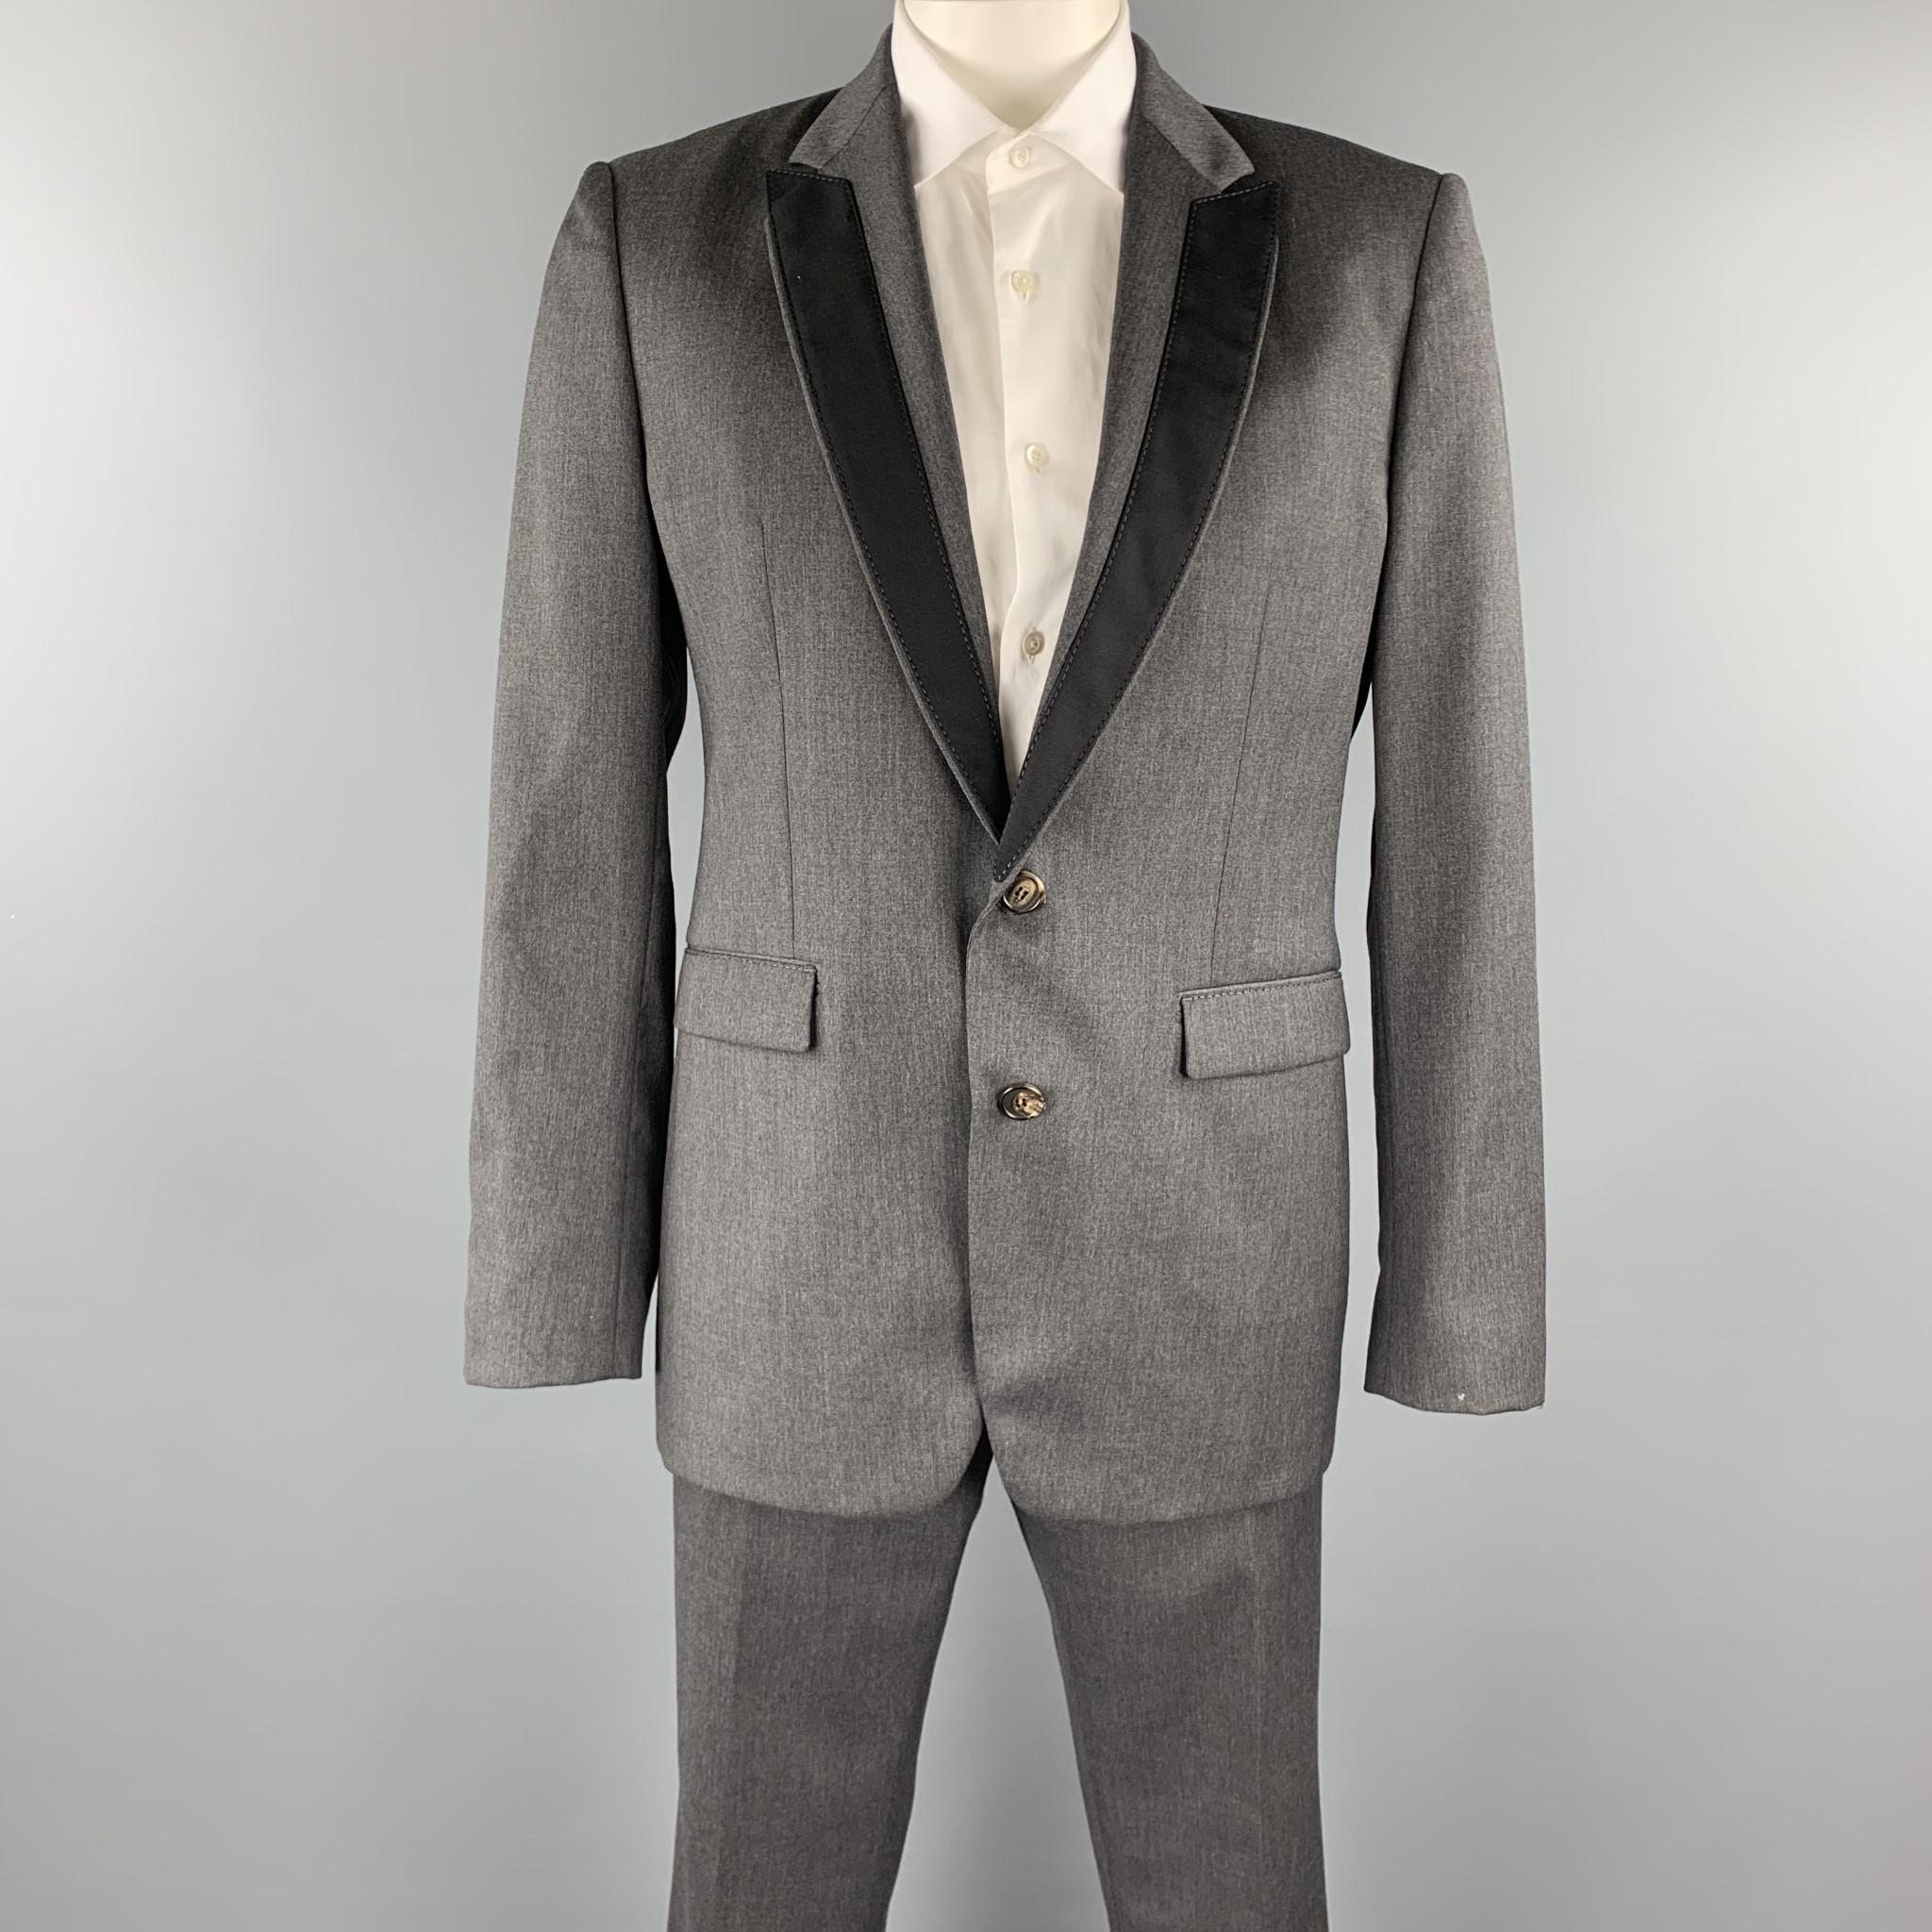 VIKTOR & ROLF suit comes in a dark gray wool and includes a single breasted, two button sport coat with a peak lapel, black trim detail, and matching front trousers. Made in Italy.

Excellent Pre-Owned Condition.
Marked: